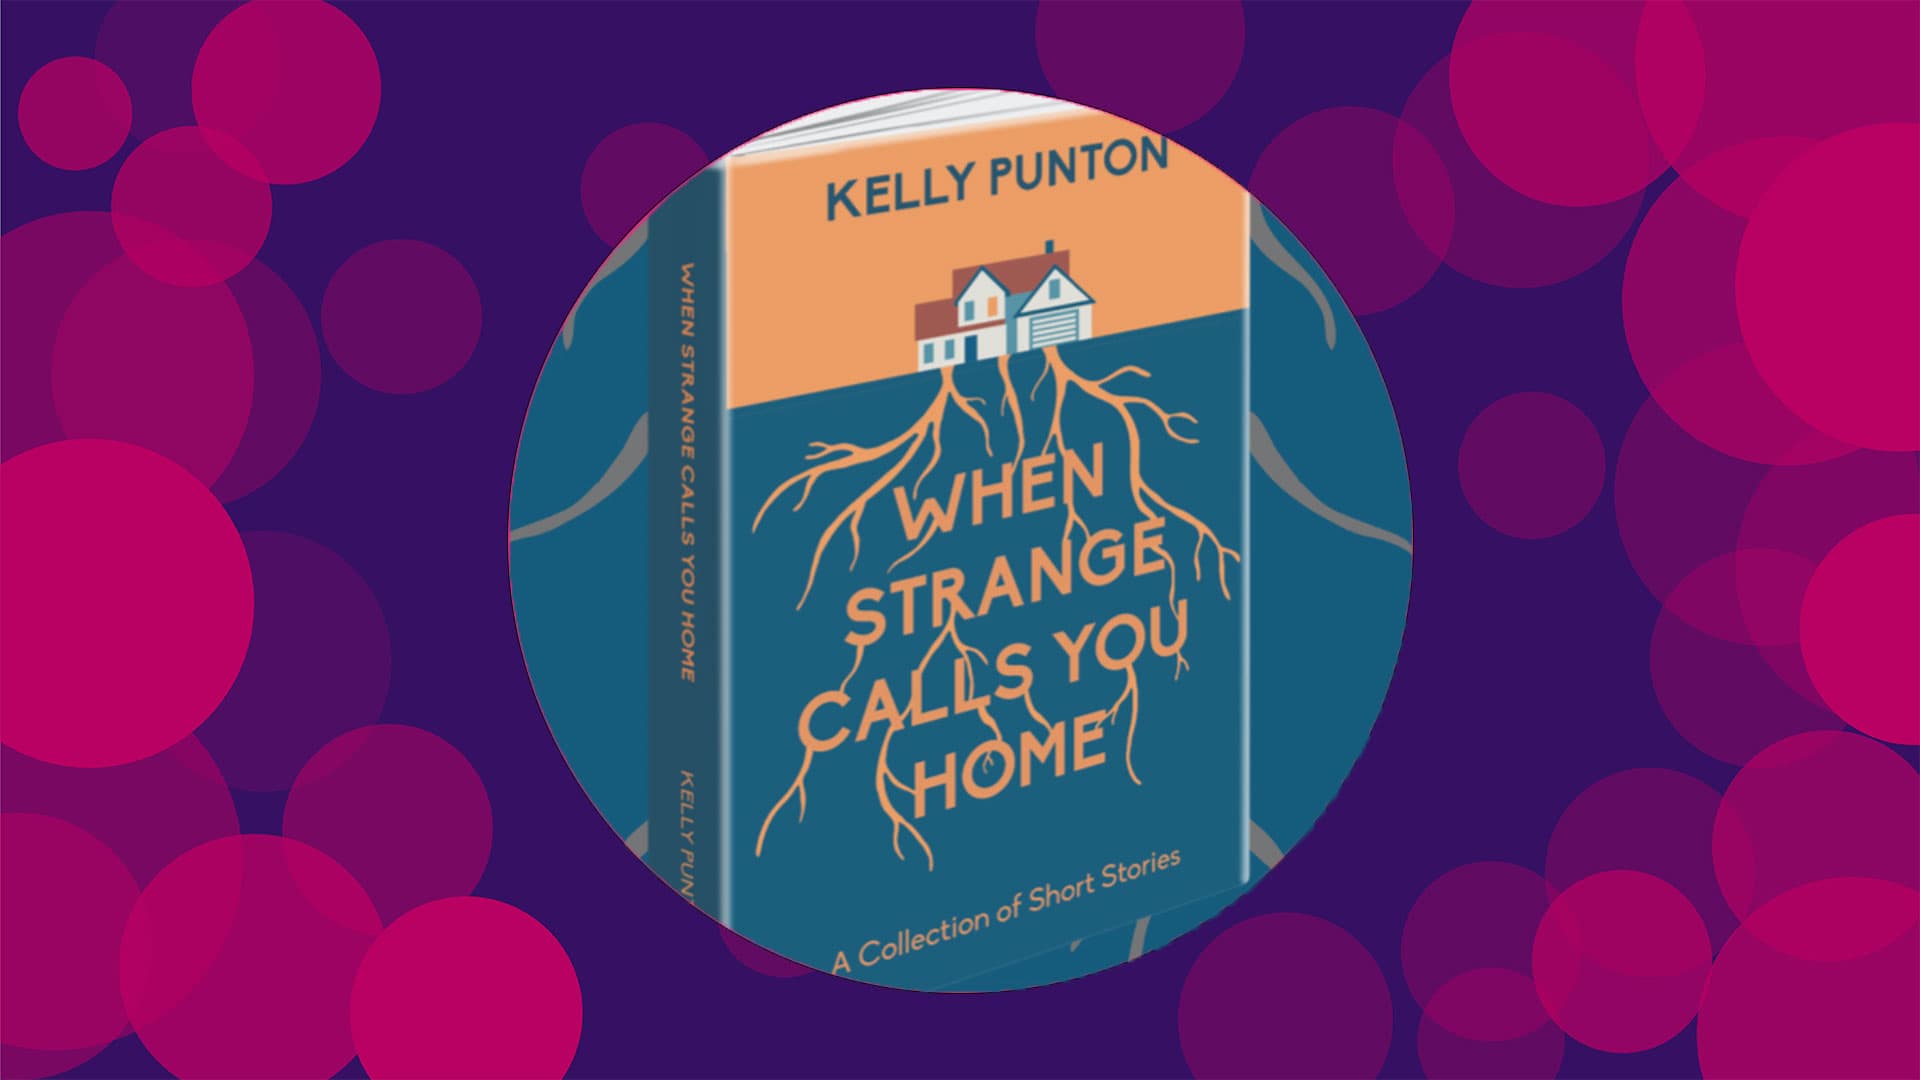 The cover of Kelly's book with an image of a house and the text 'Kelly Punton. When strange calls you home? A collection of short stories.